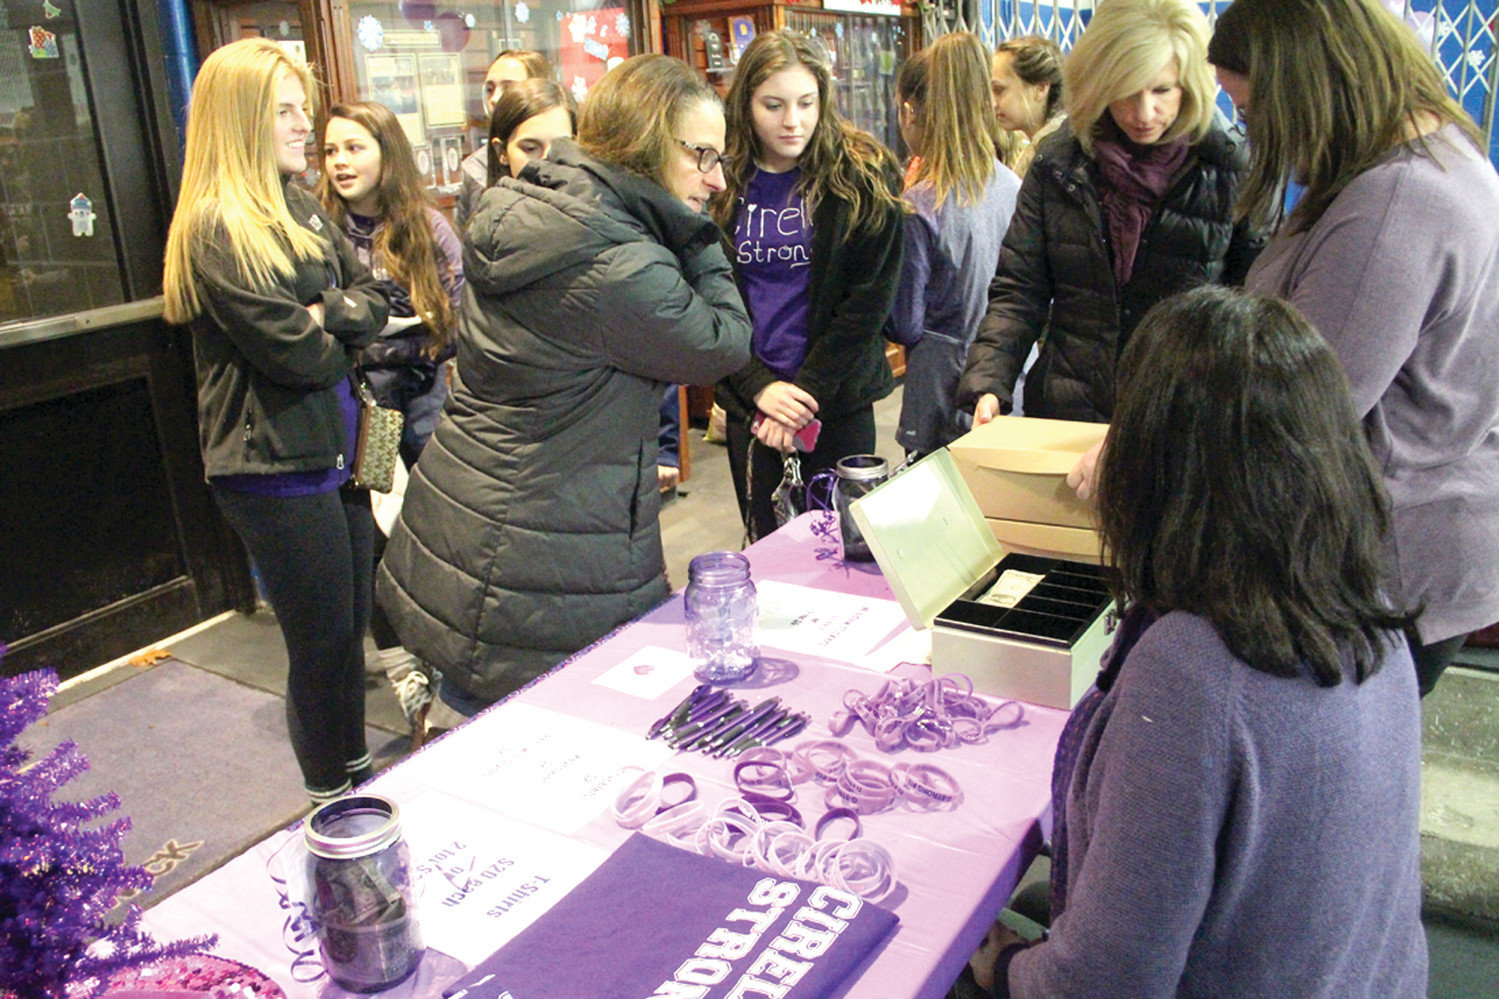 TO BENEFIT THE FOUNDATION: Friends of Tara Cirella and members of the Gianna Cirella Memorial Foundation decorated Thayer Arena in purple for Friday’s Toll Gate hockey games as well as sold t-shirts and purple bracelets in Gianna’s memory.